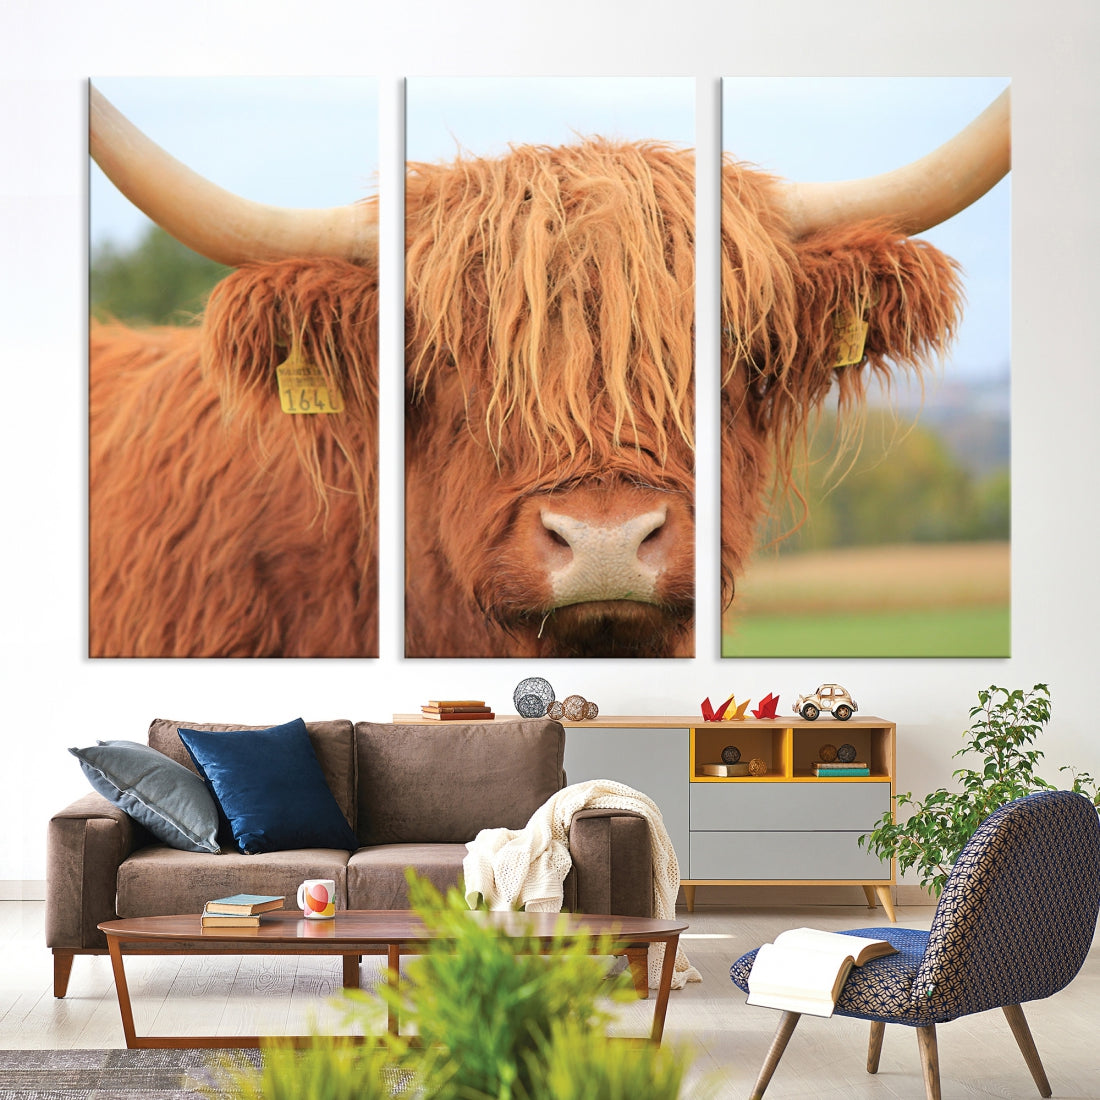 Highland Cow Close-up Canvas Wall Art Print Multi Panel Extra Large Canvas Set Framed Ready to Hang Artwork